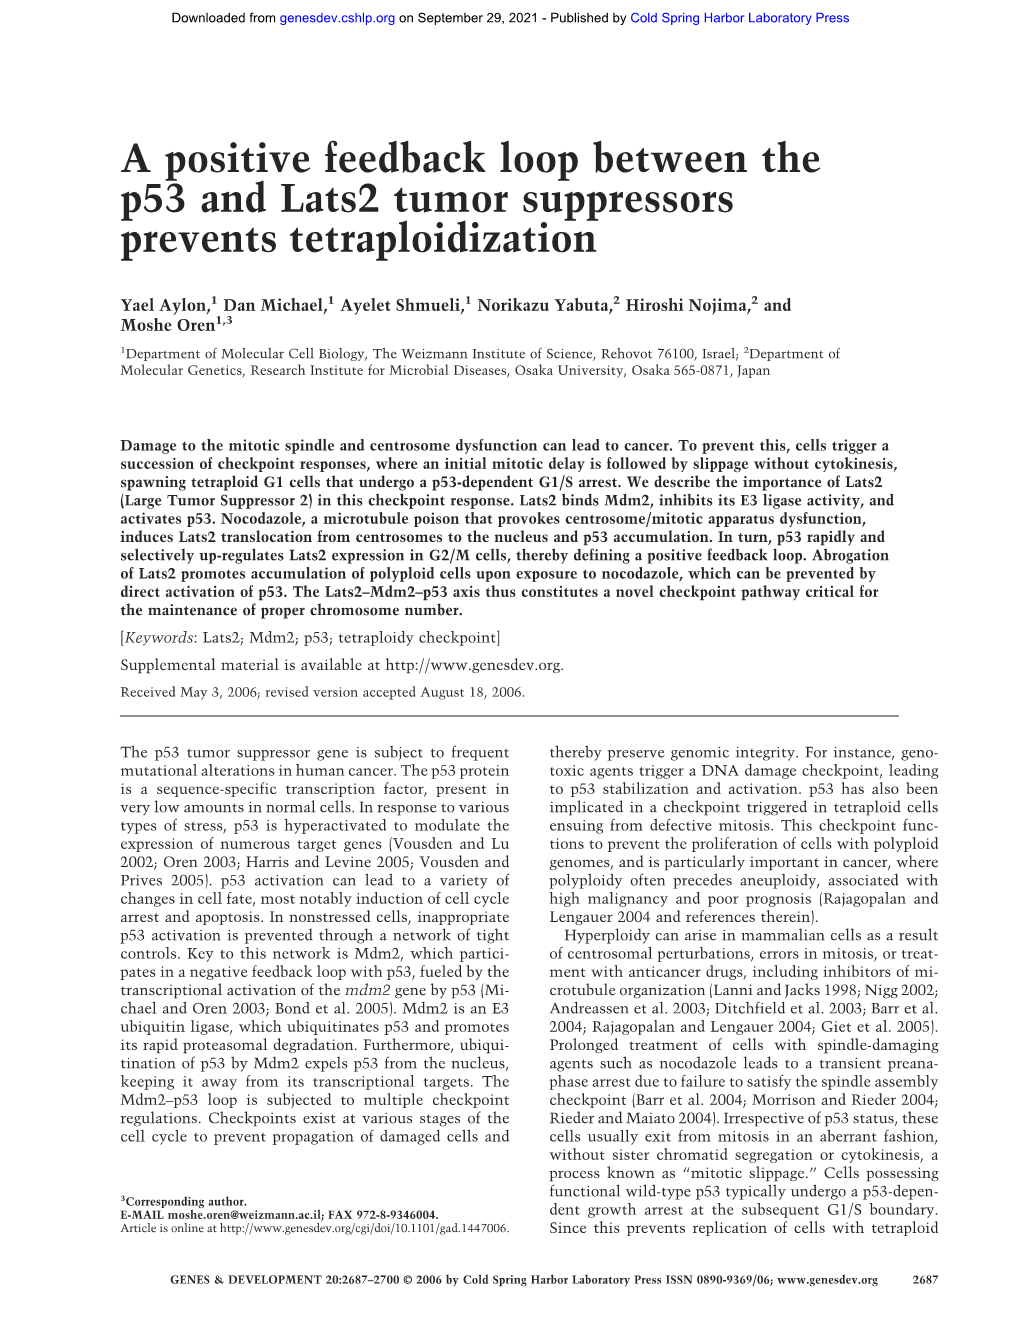 A Positive Feedback Loop Between the P53 and Lats2 Tumor Suppressors Prevents Tetraploidization